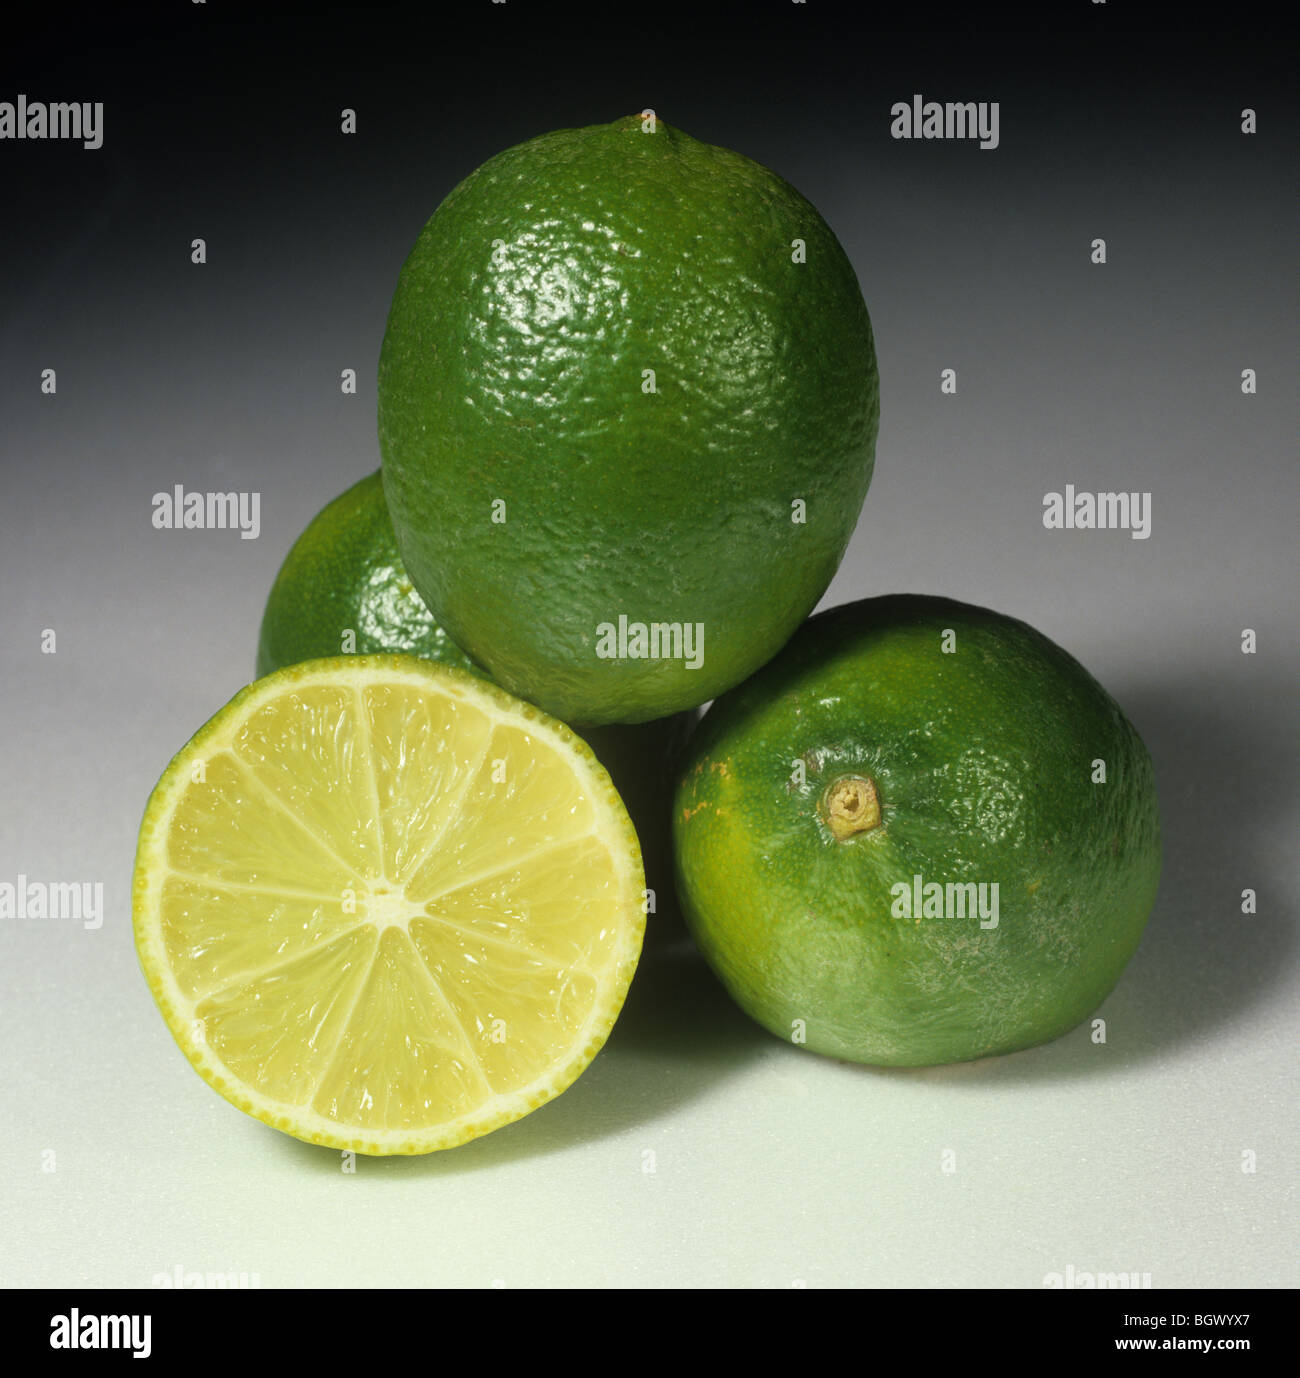 Whole & sectioned lime fruit varieties Tahiti & Persian, country of origin: Brazil Stock Photo